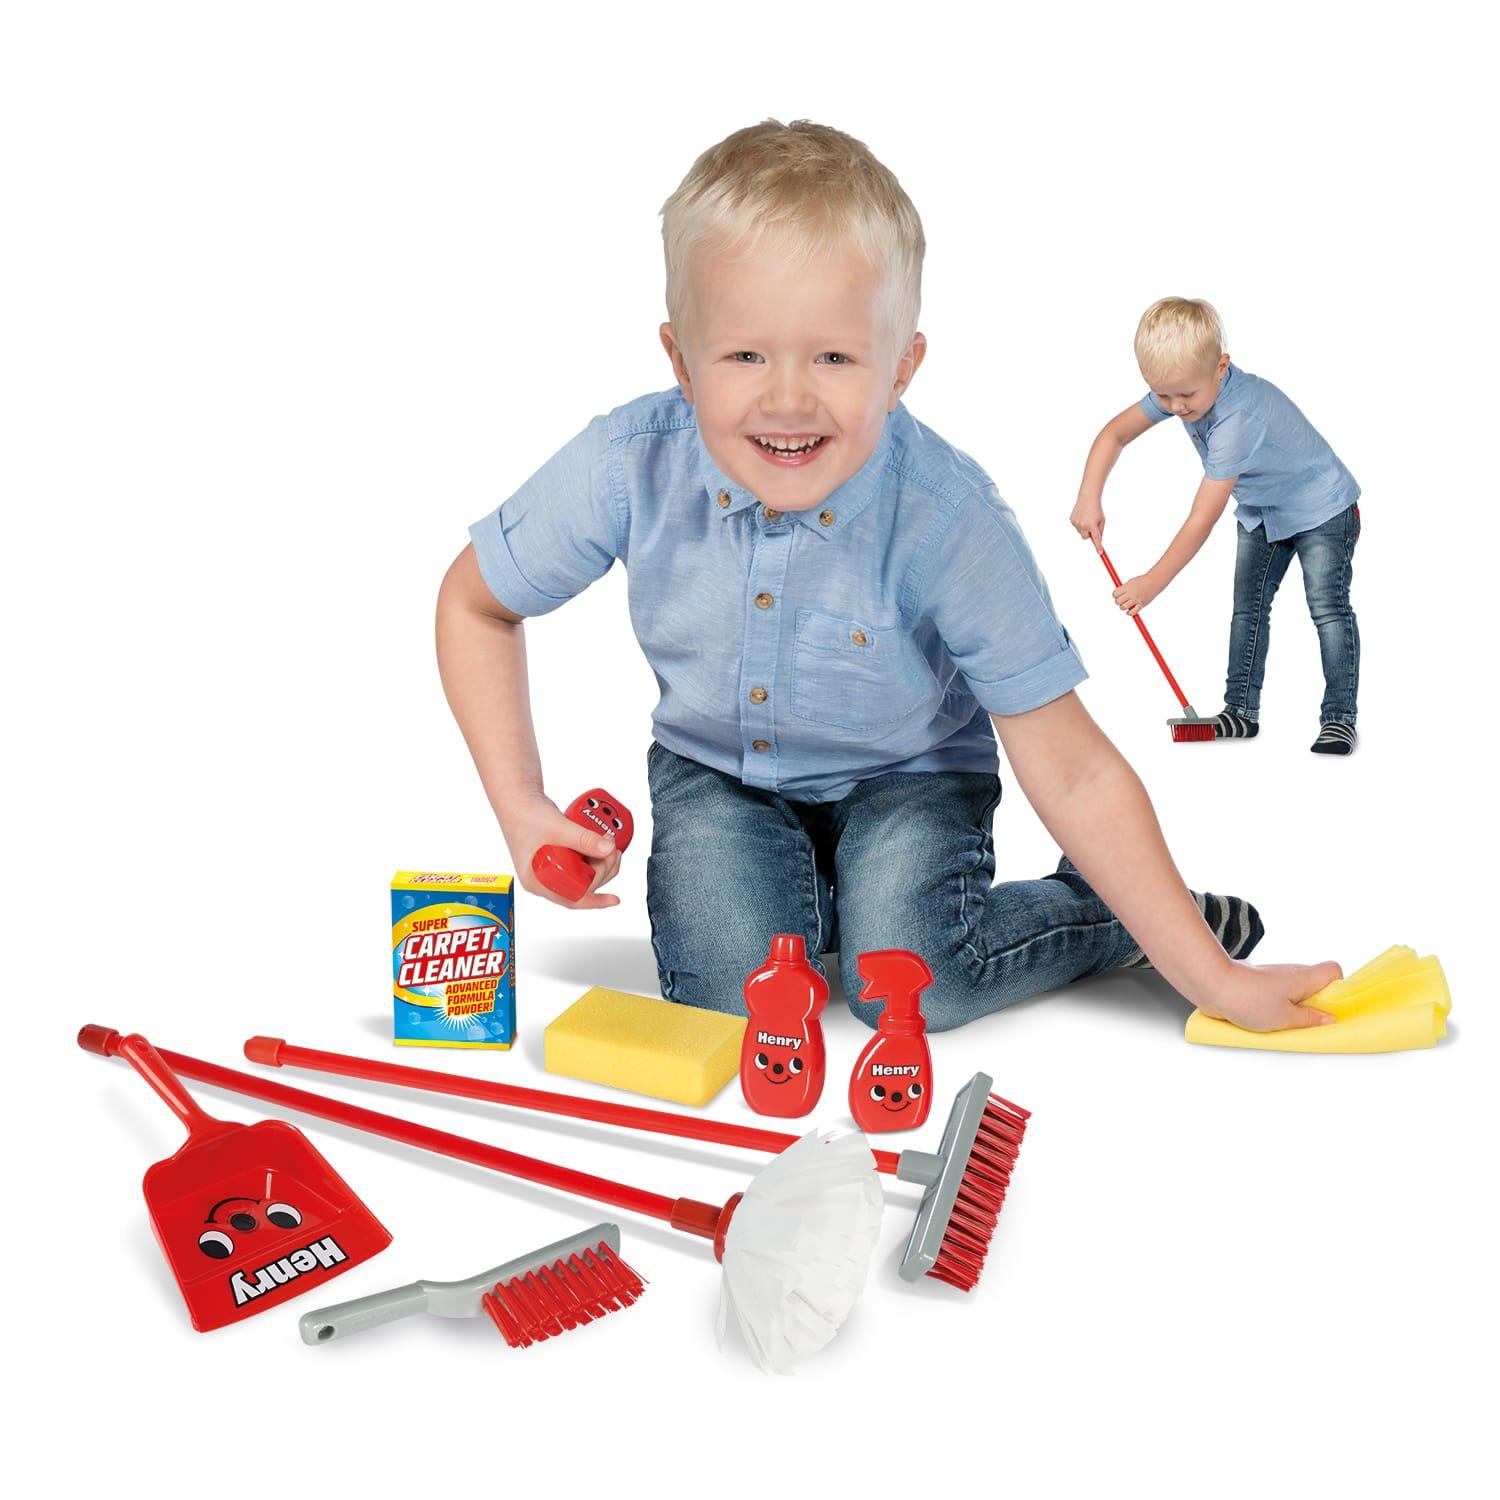 Casdon HENRY FLOOR CLEANING SET Pretend Household Cleaning Play BNIP 